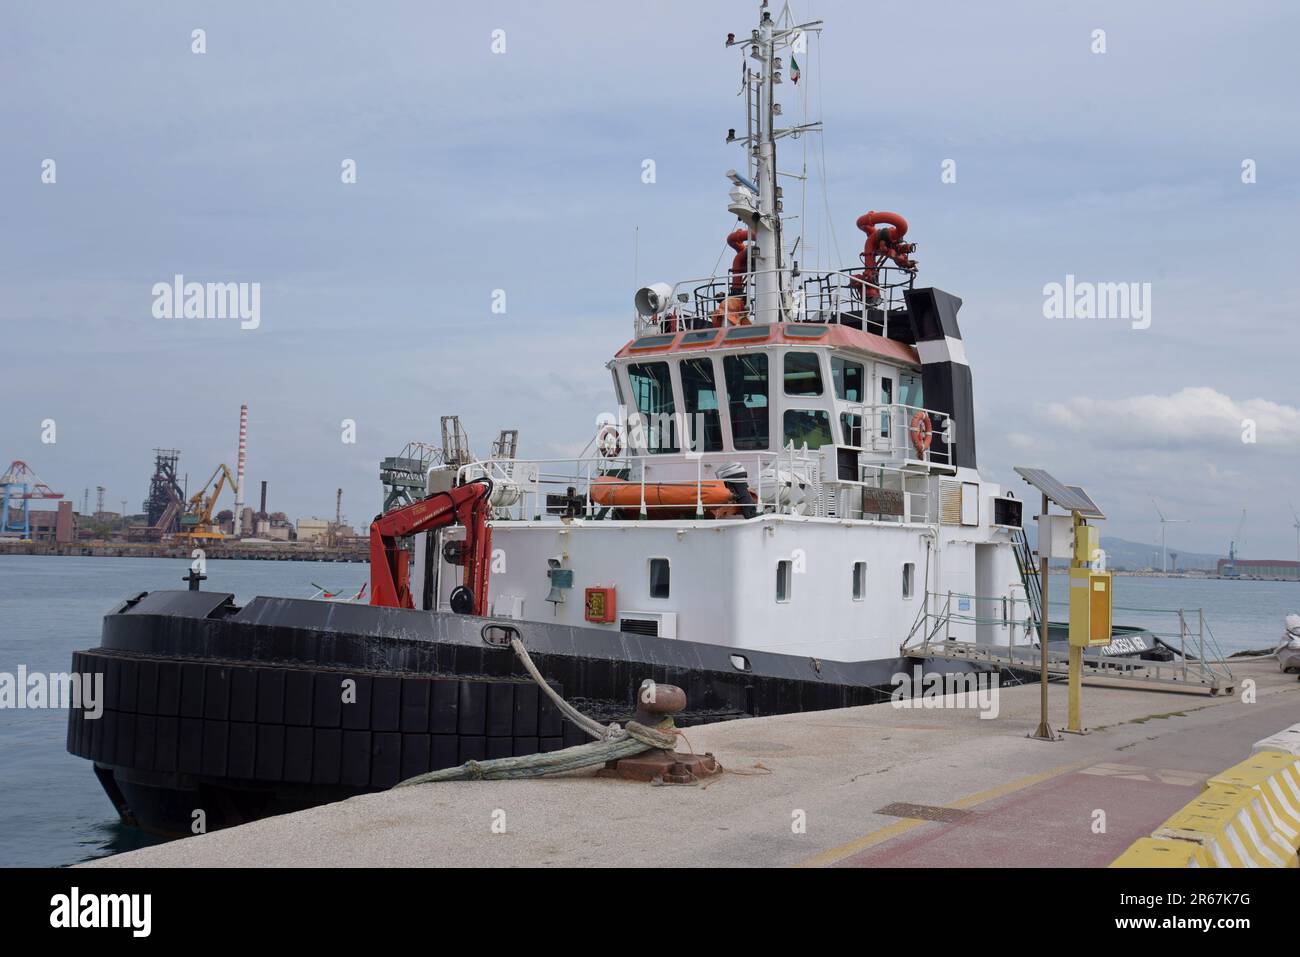 The tractor Tug Francesca Neri owned by Neri Group Marine Services, docked in the harbour at Piombino, Livorno, Italy, April 2023 Stock Photo